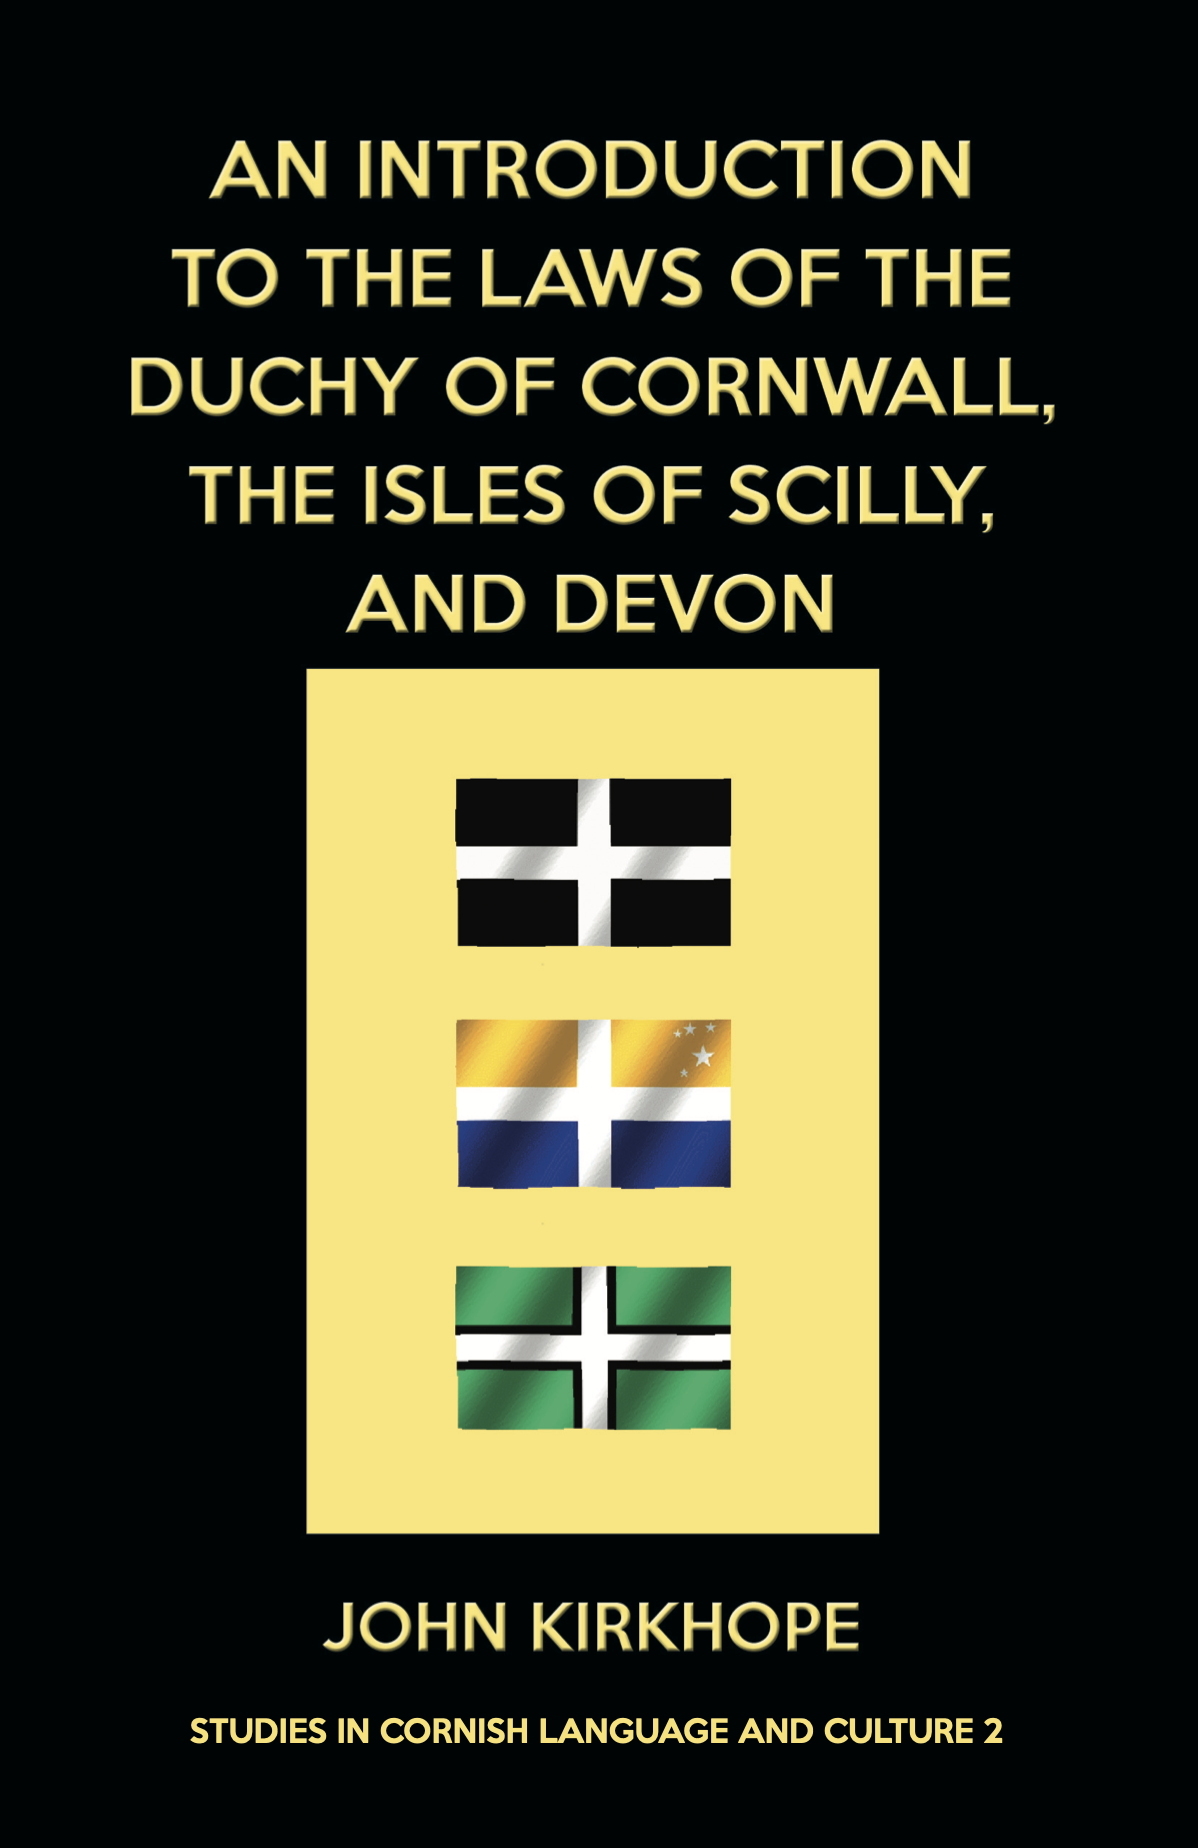 Laws of the Duchy of Cornwall